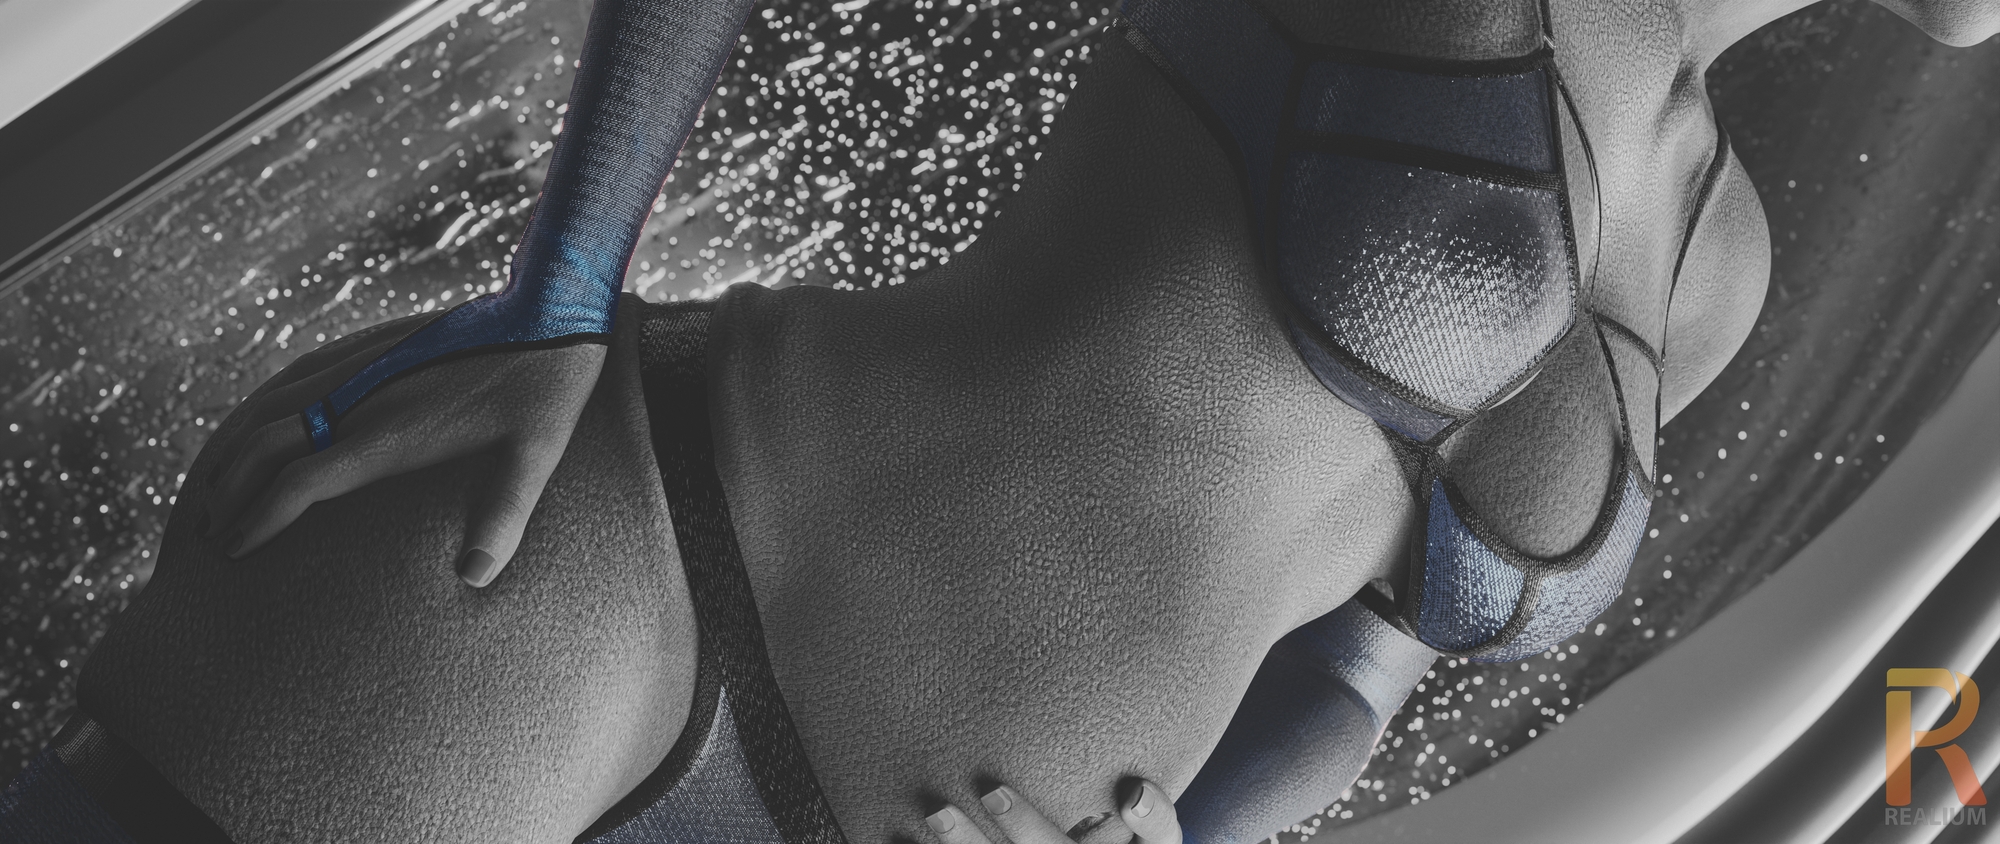 LIARA PINUP PART 1 Liara T'soni Liara T Soni Liara Mass Effect Asari (mass Effect) Pink Nipples Pinup Pregnant Lingerie Sexy Lingerie Nude Partially_nude Black And White Gloves Stockings 13